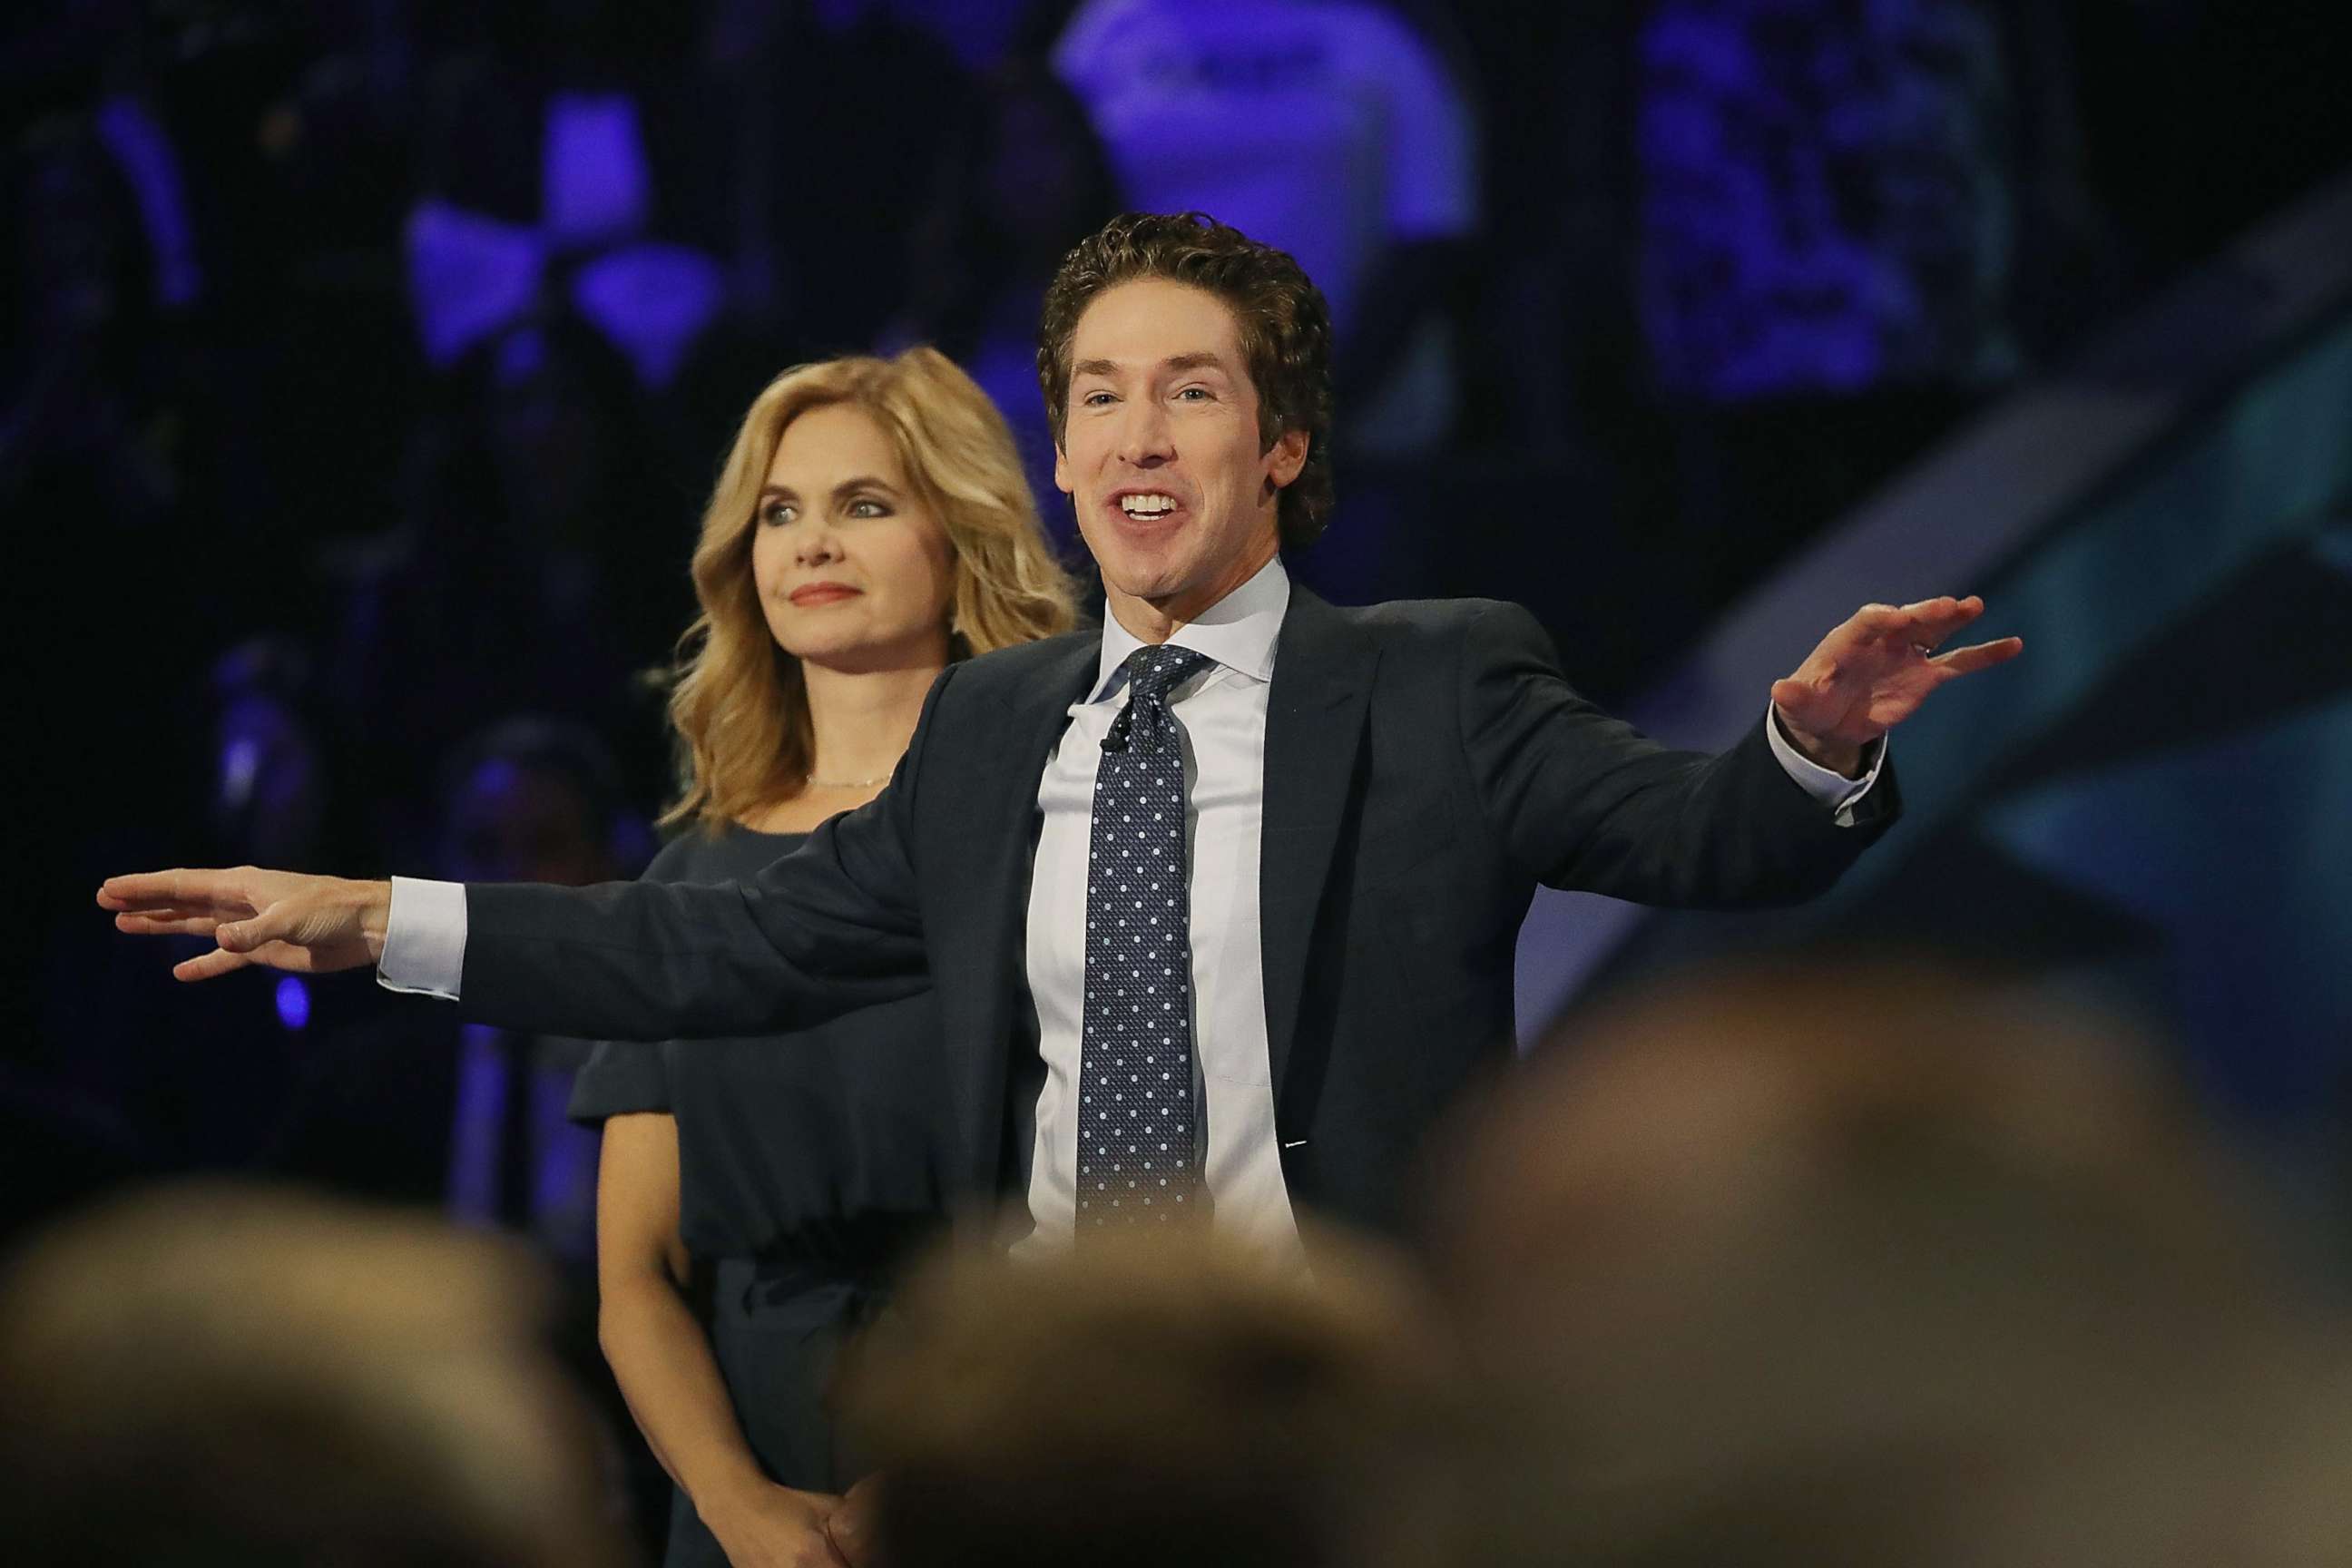 PHOTO: Joel Osteen, the pastor of Lakewood Church, stands with his wife, Victoria Osteen, as he conducts a service at his church, Sep. 3, 2017, in Houston.